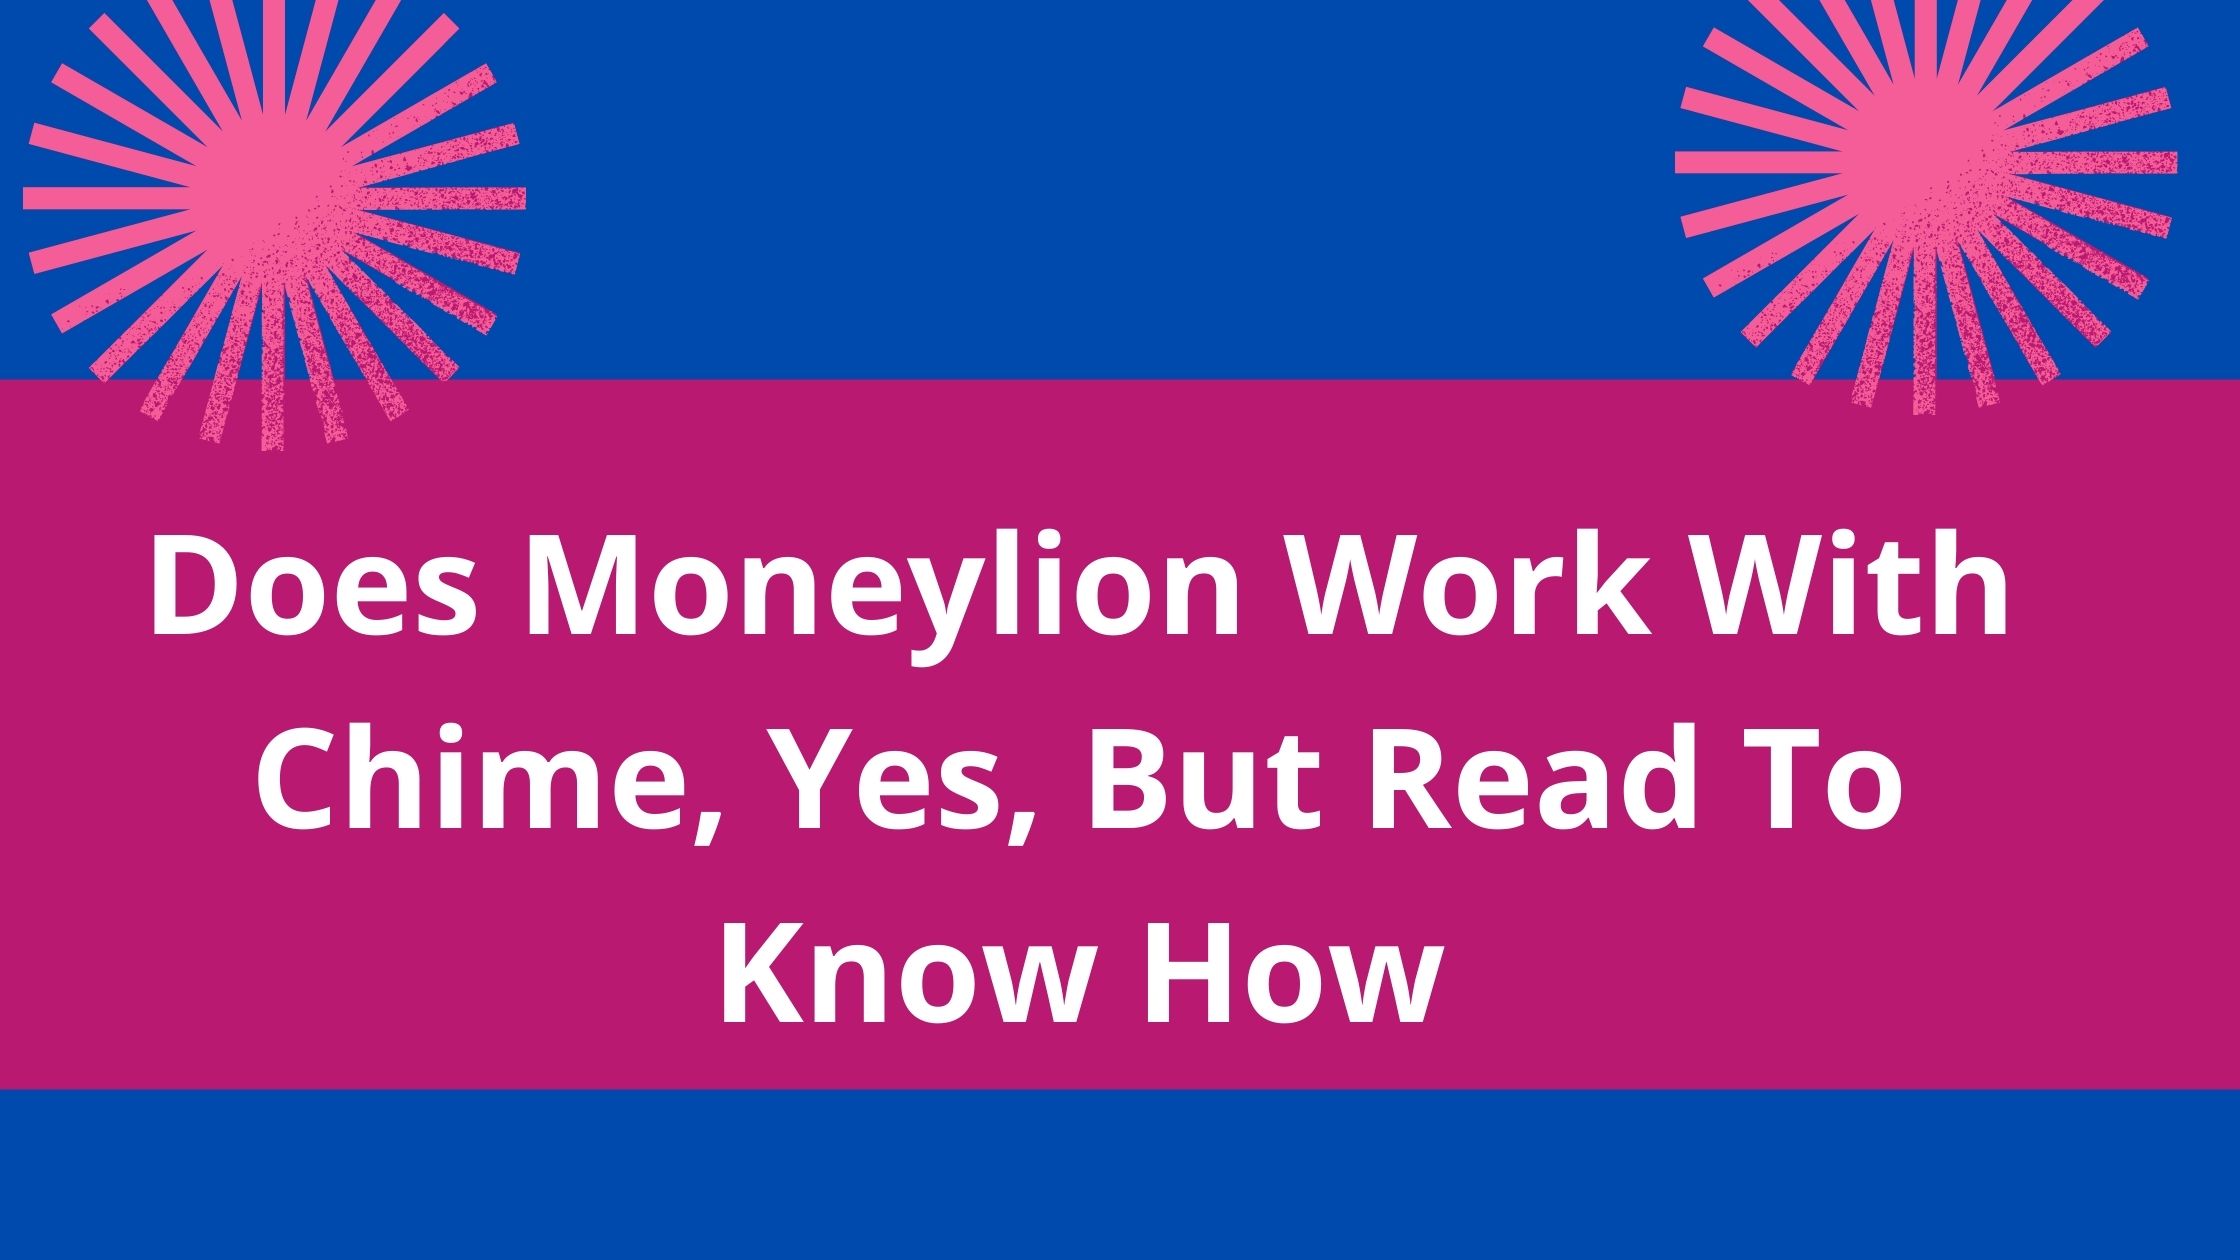 Does Moneylion Work With Chime, 2022, Yes, But Read To Know How